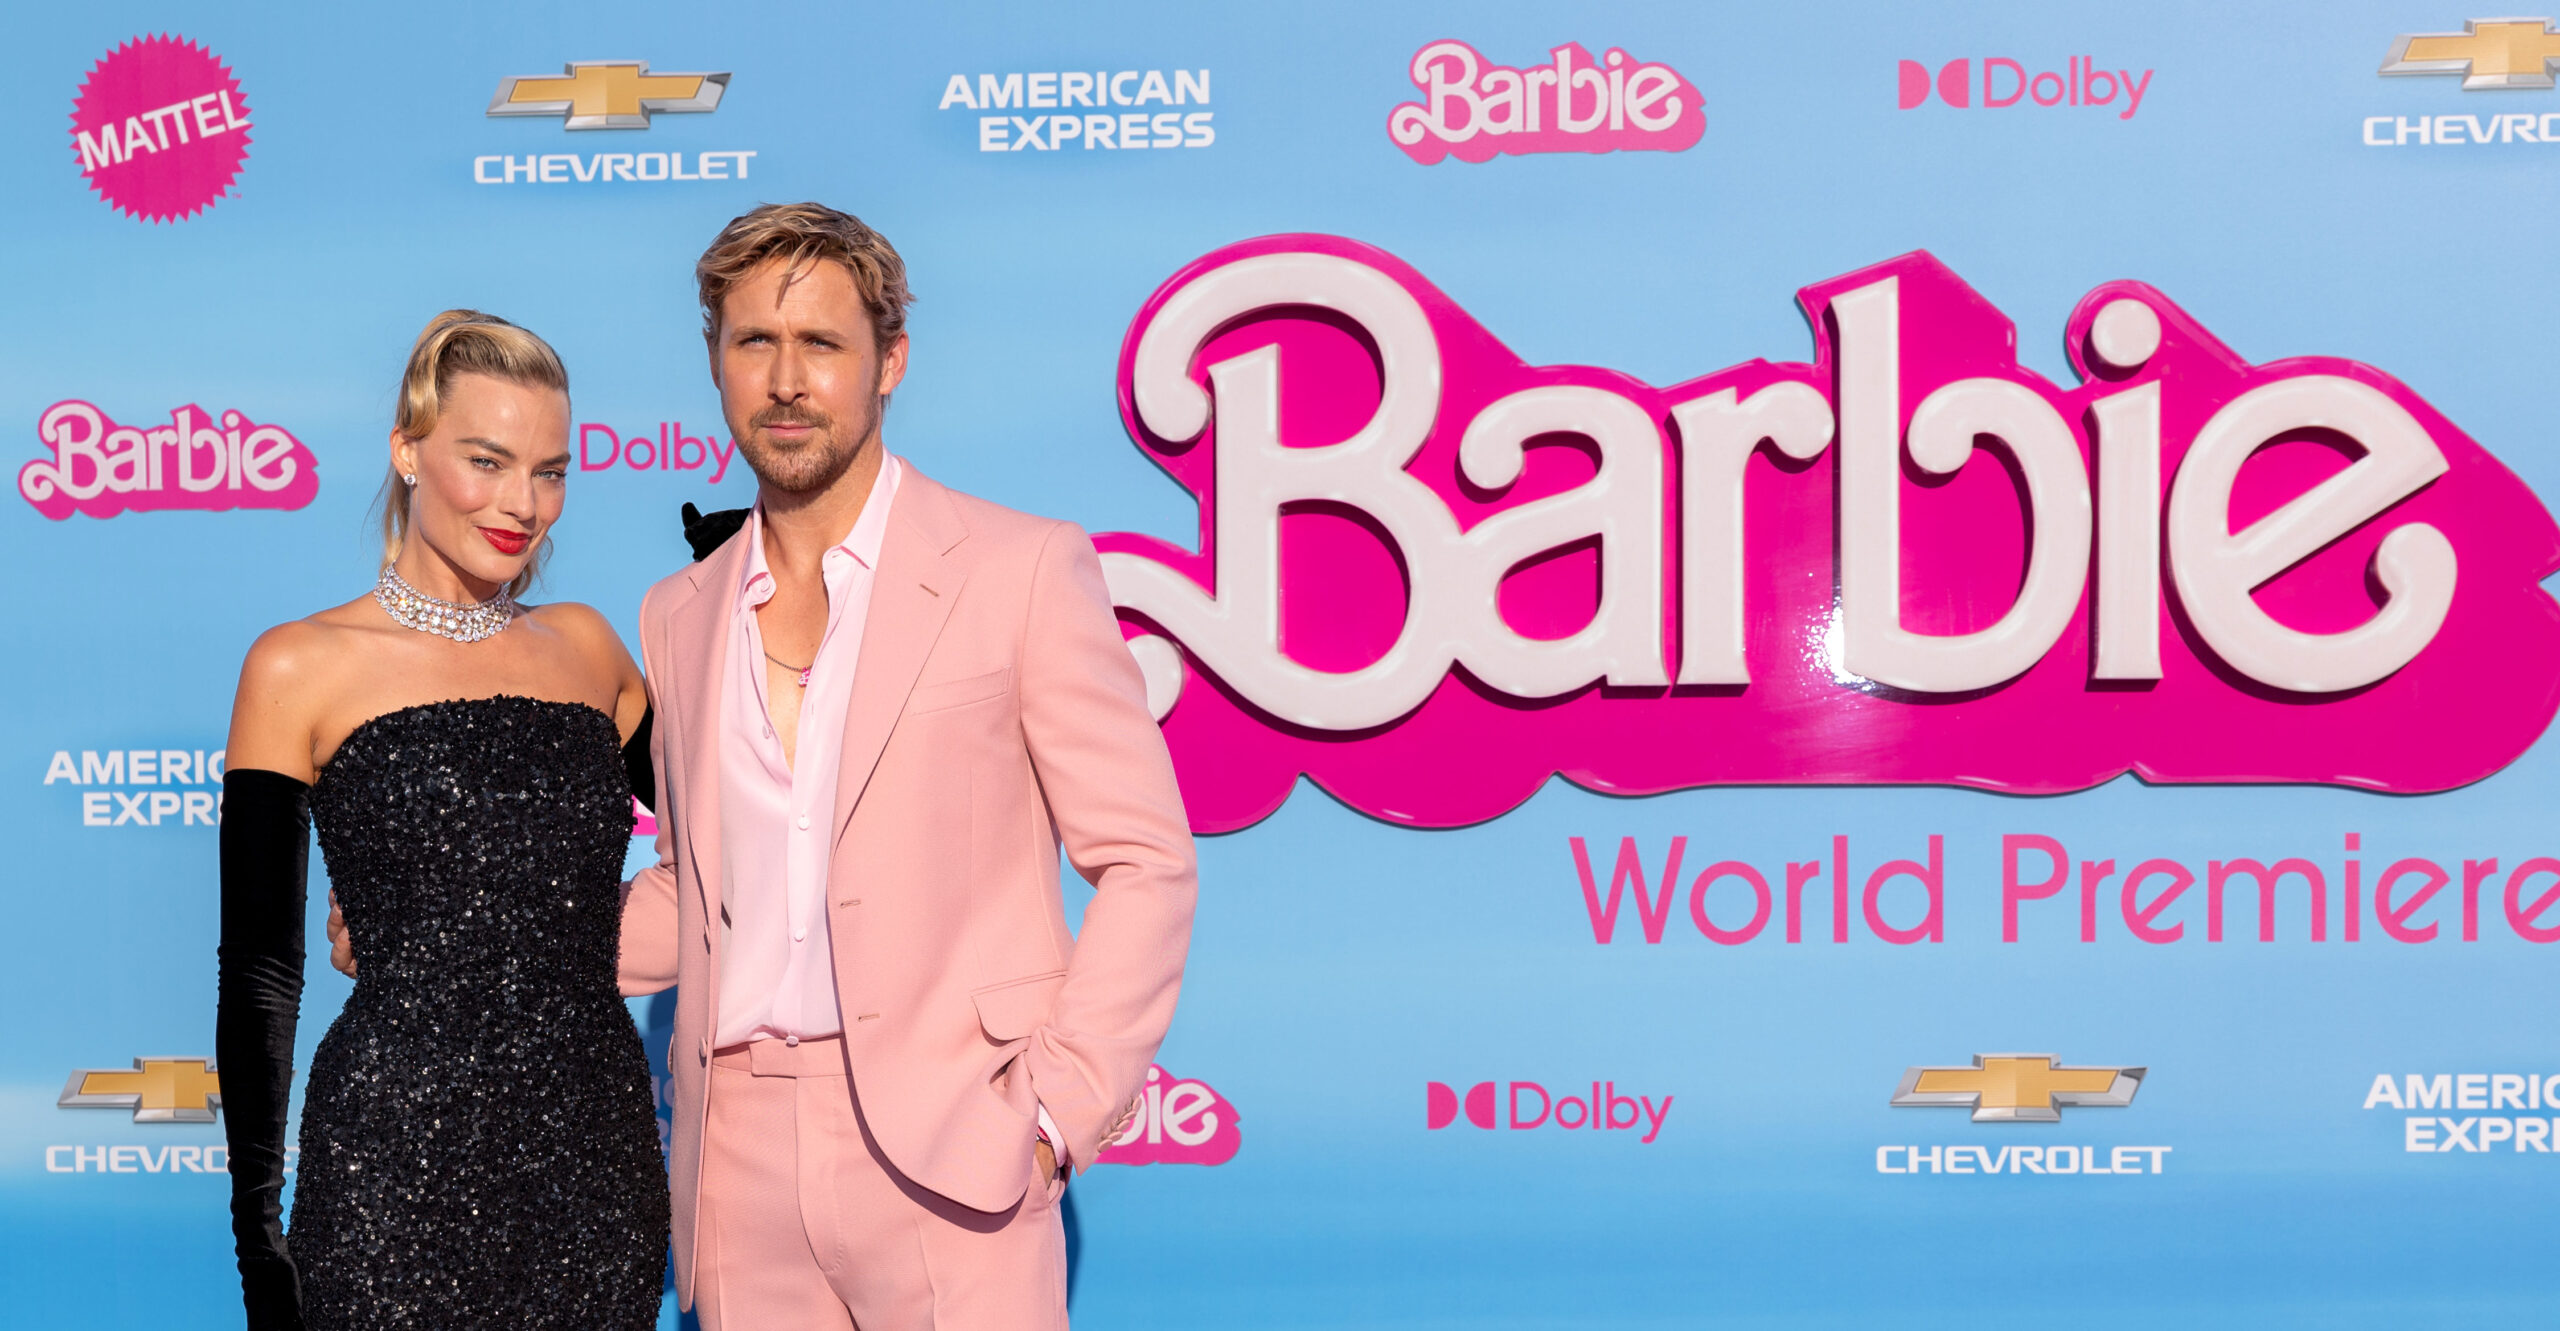 Will Hollywood Learn From Disappointing 'Barbie' Payoff for Pandering to China?